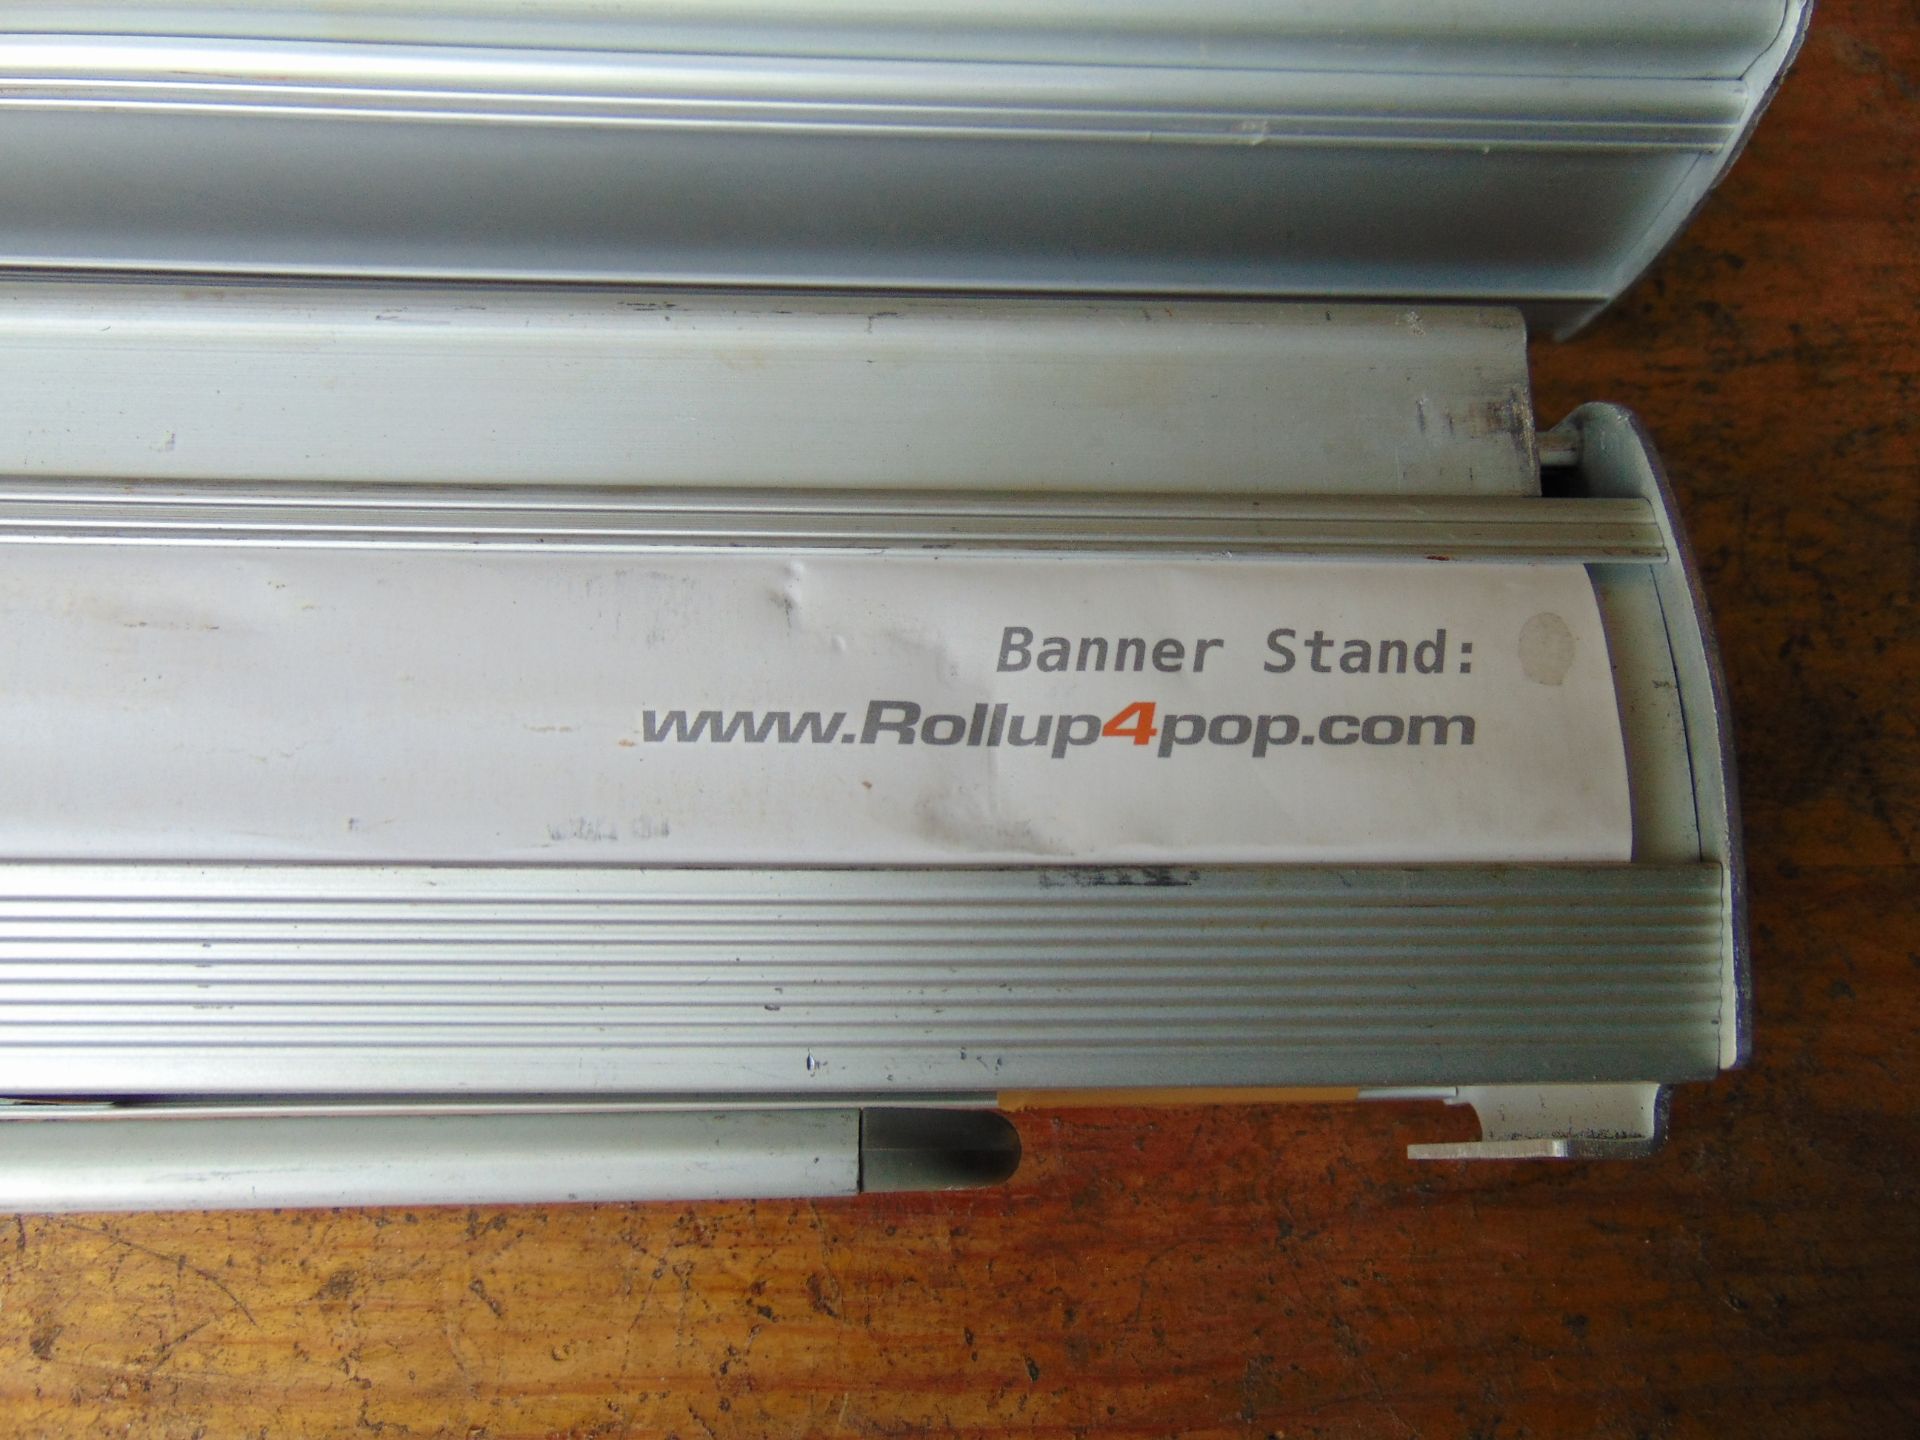 3 x Rollup 4 Pop Banner Stands from RAF - Image 3 of 6